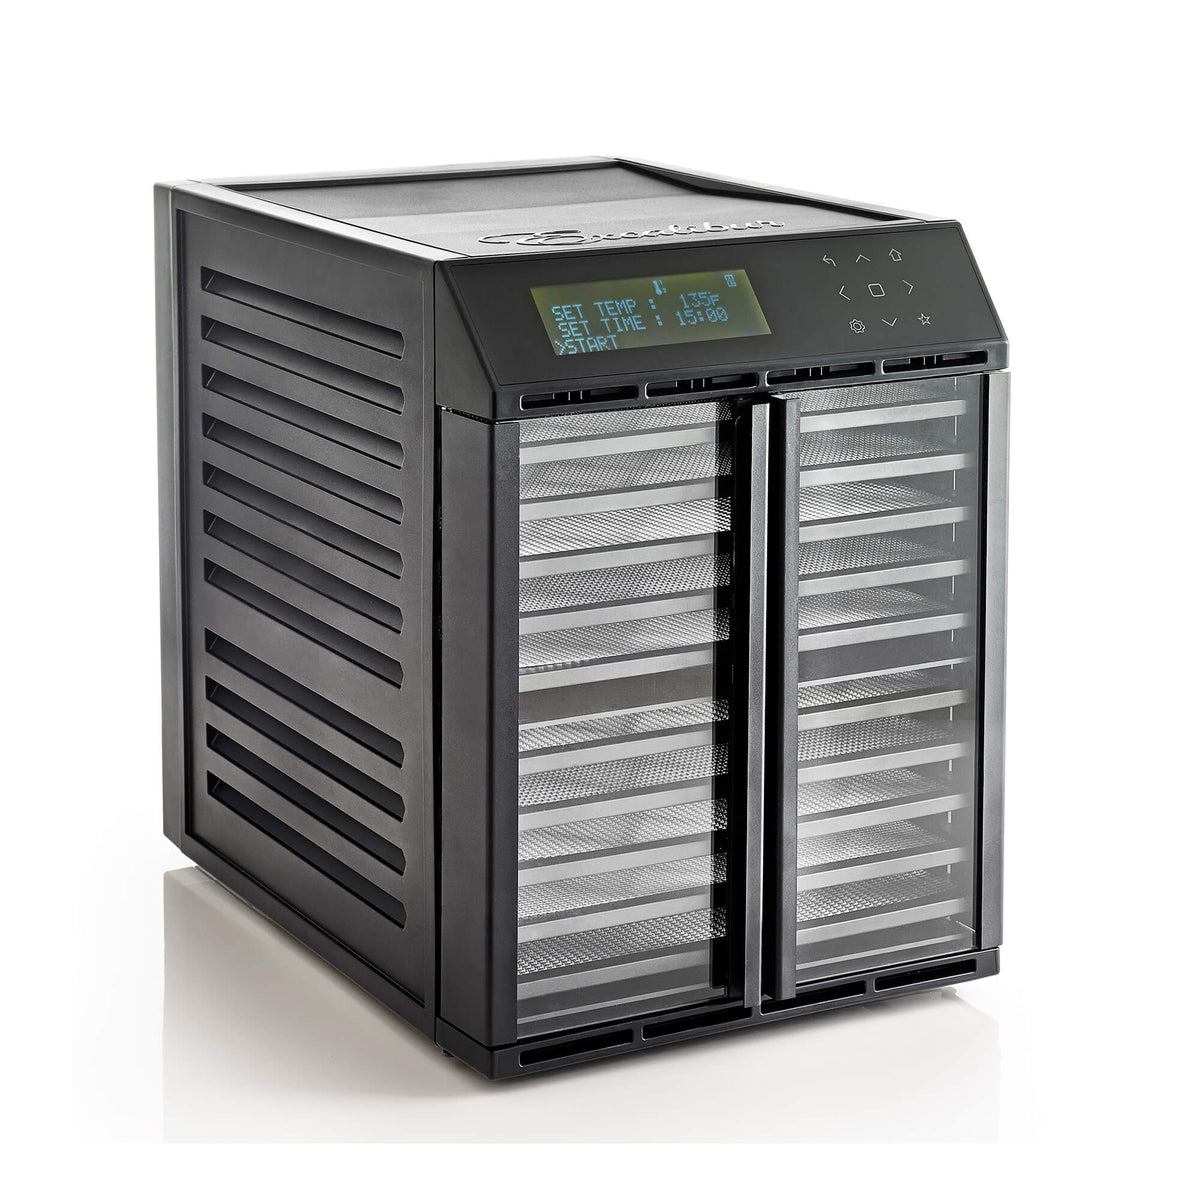 Excalibur RES10 10 tray compact digital dehydrator with clear hinged doors closed and display active.